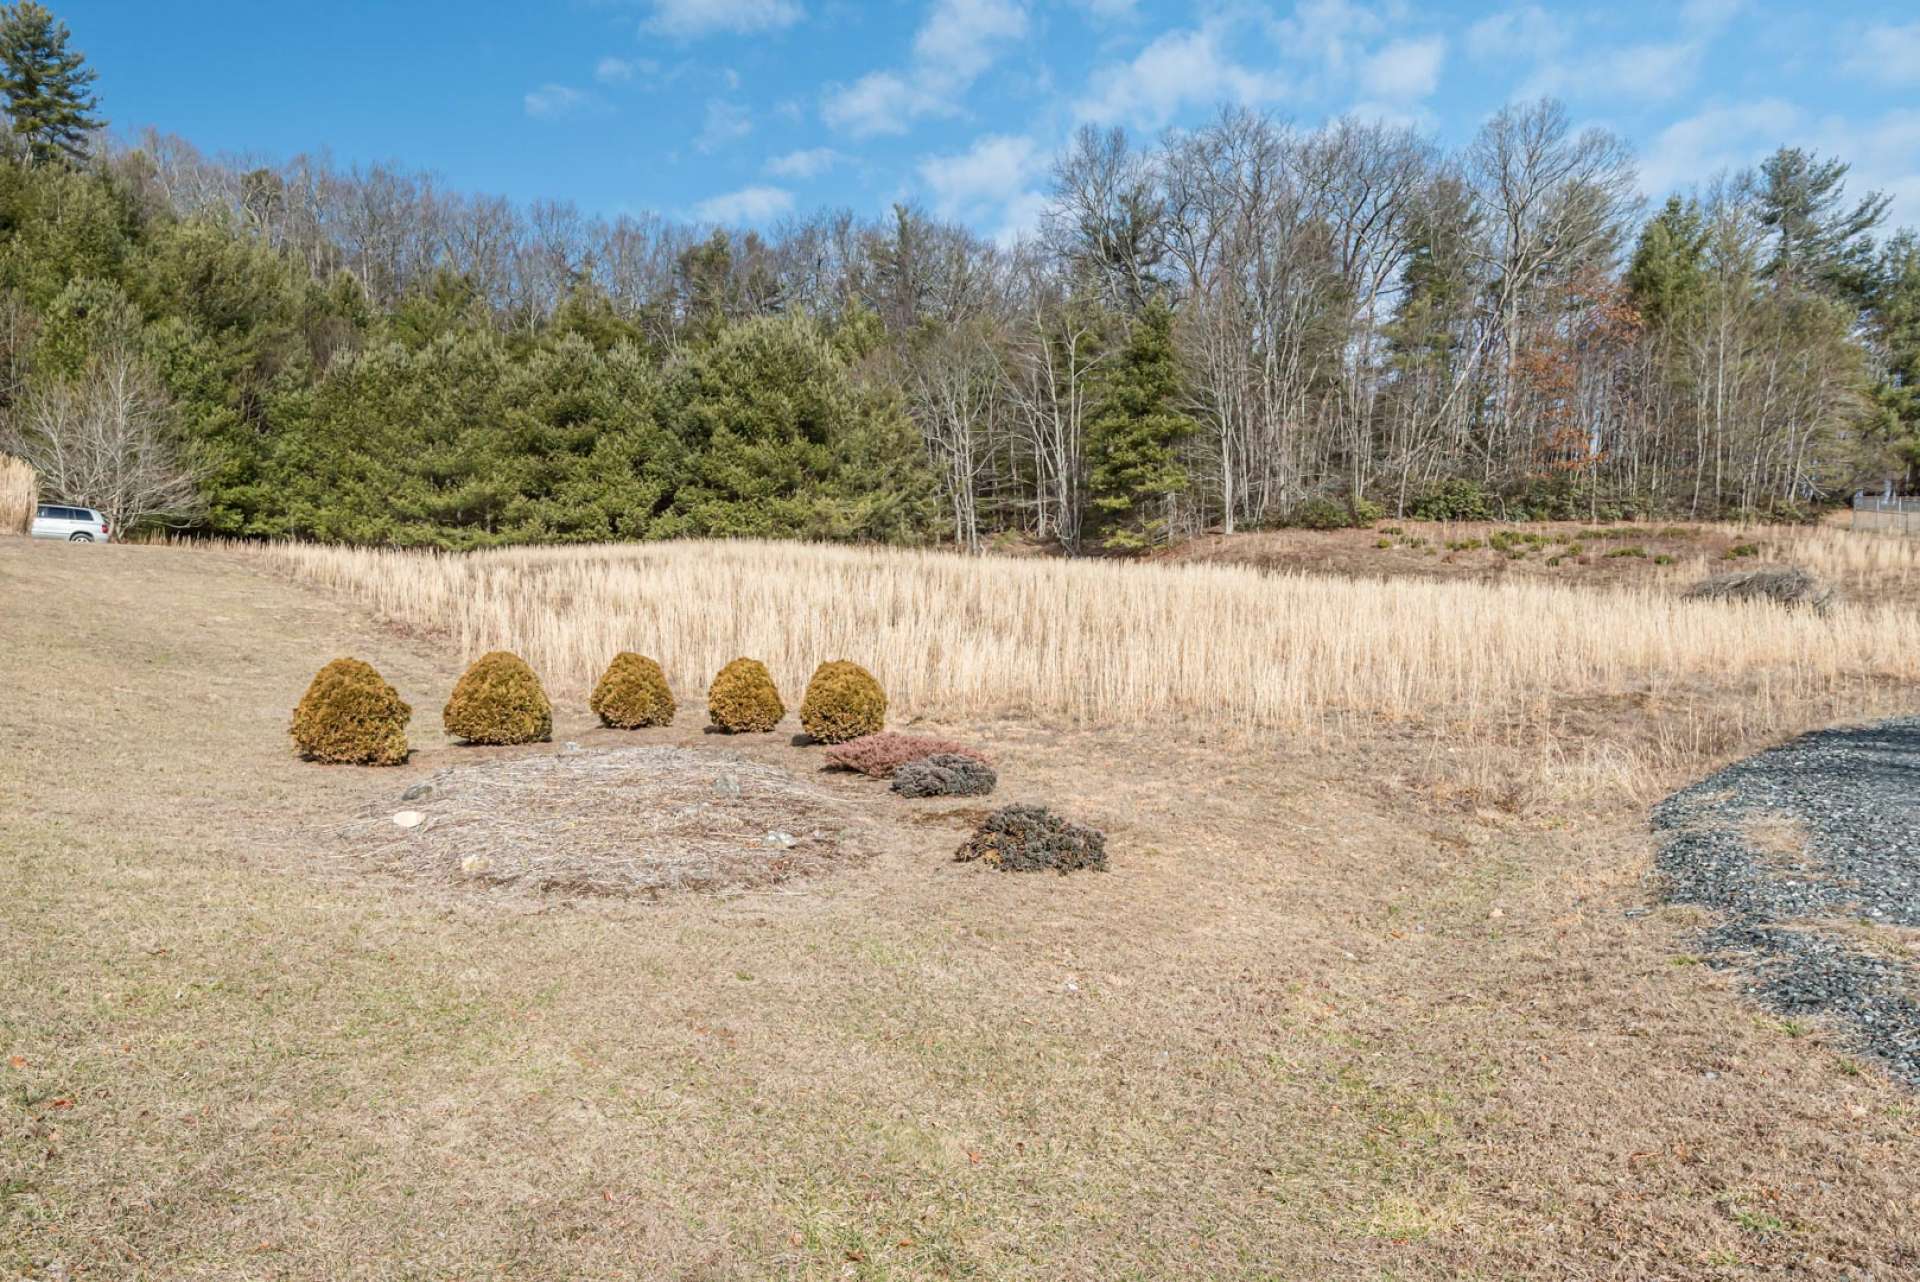 The 5.54 acre setting includes both open land and wooded acreage providing both garden and play space, and woodlands for exploring.